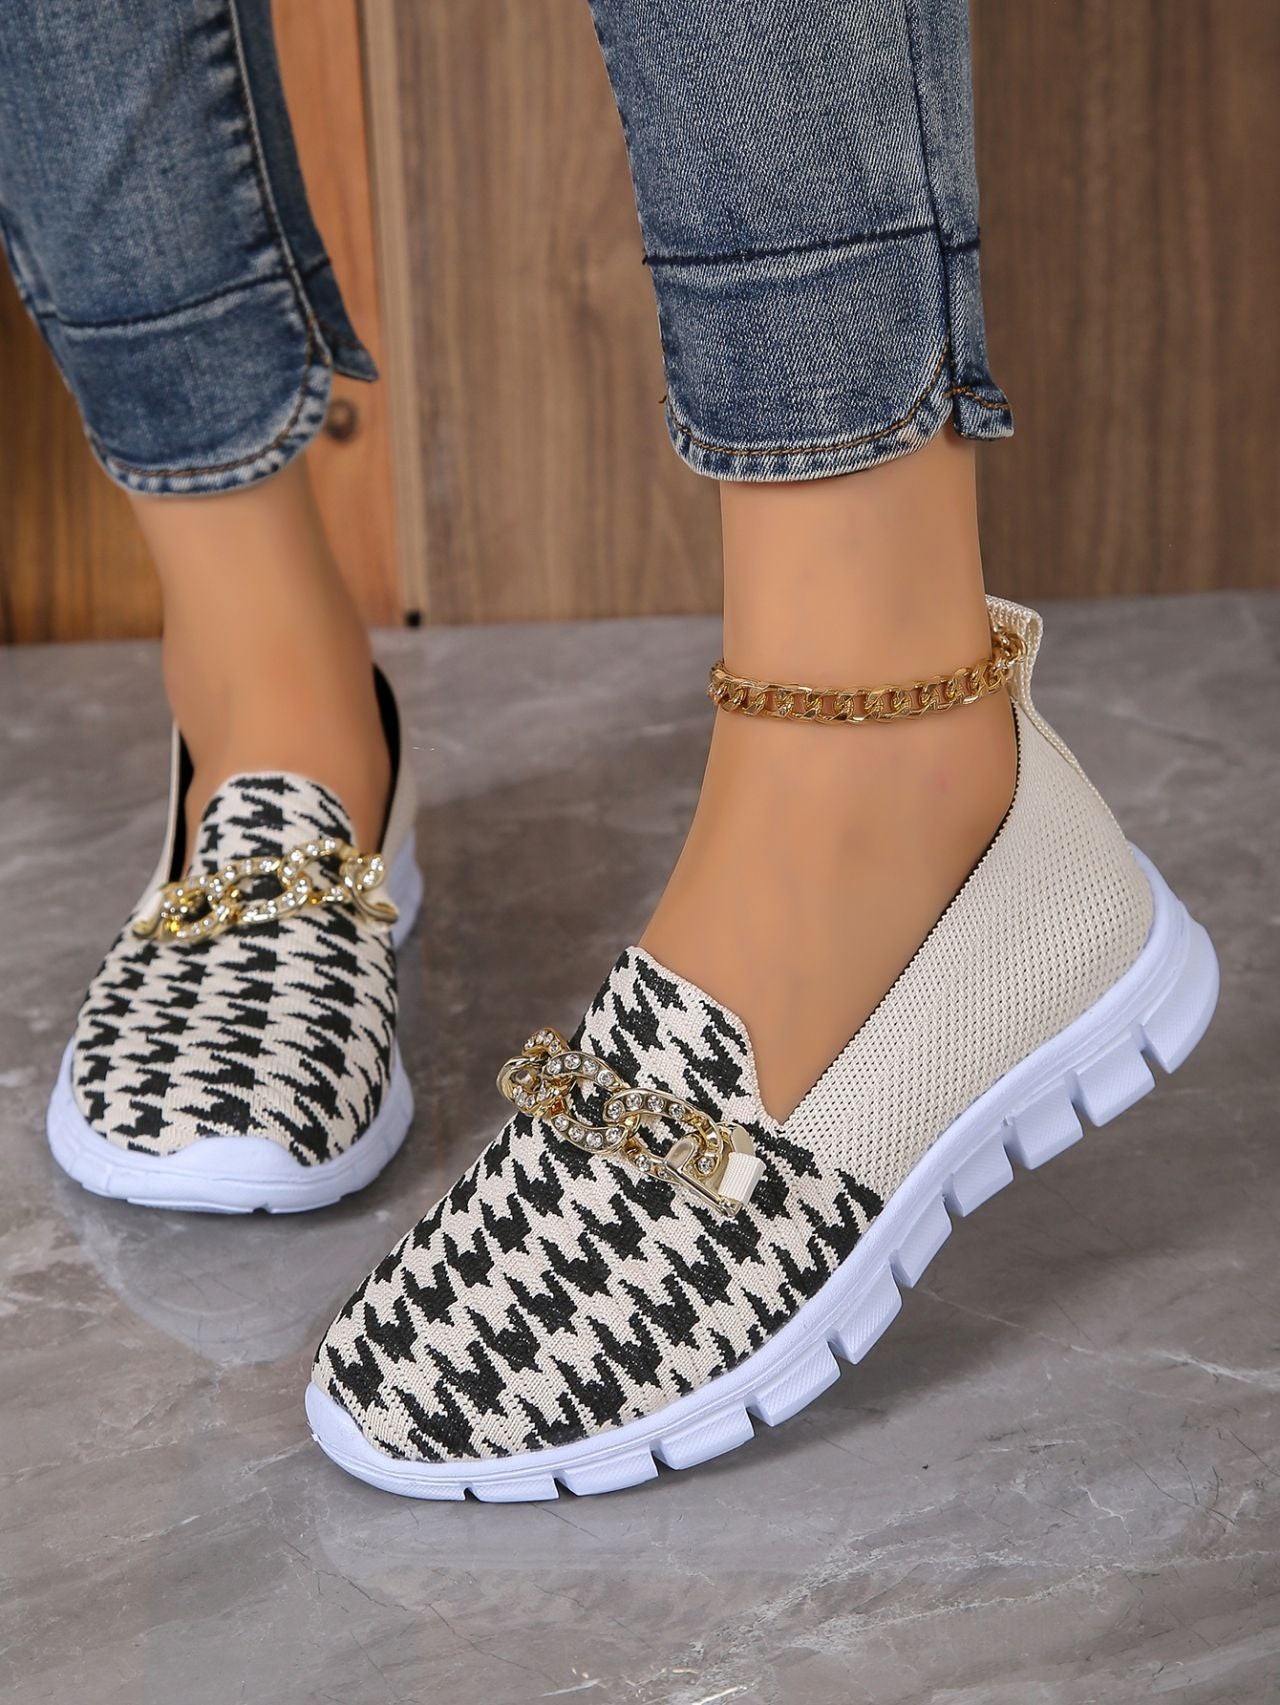 Casual Houndstooth Print Chain Mesh Shoes Summer Walking Sports Flat Shoes Women Breathable Loafers